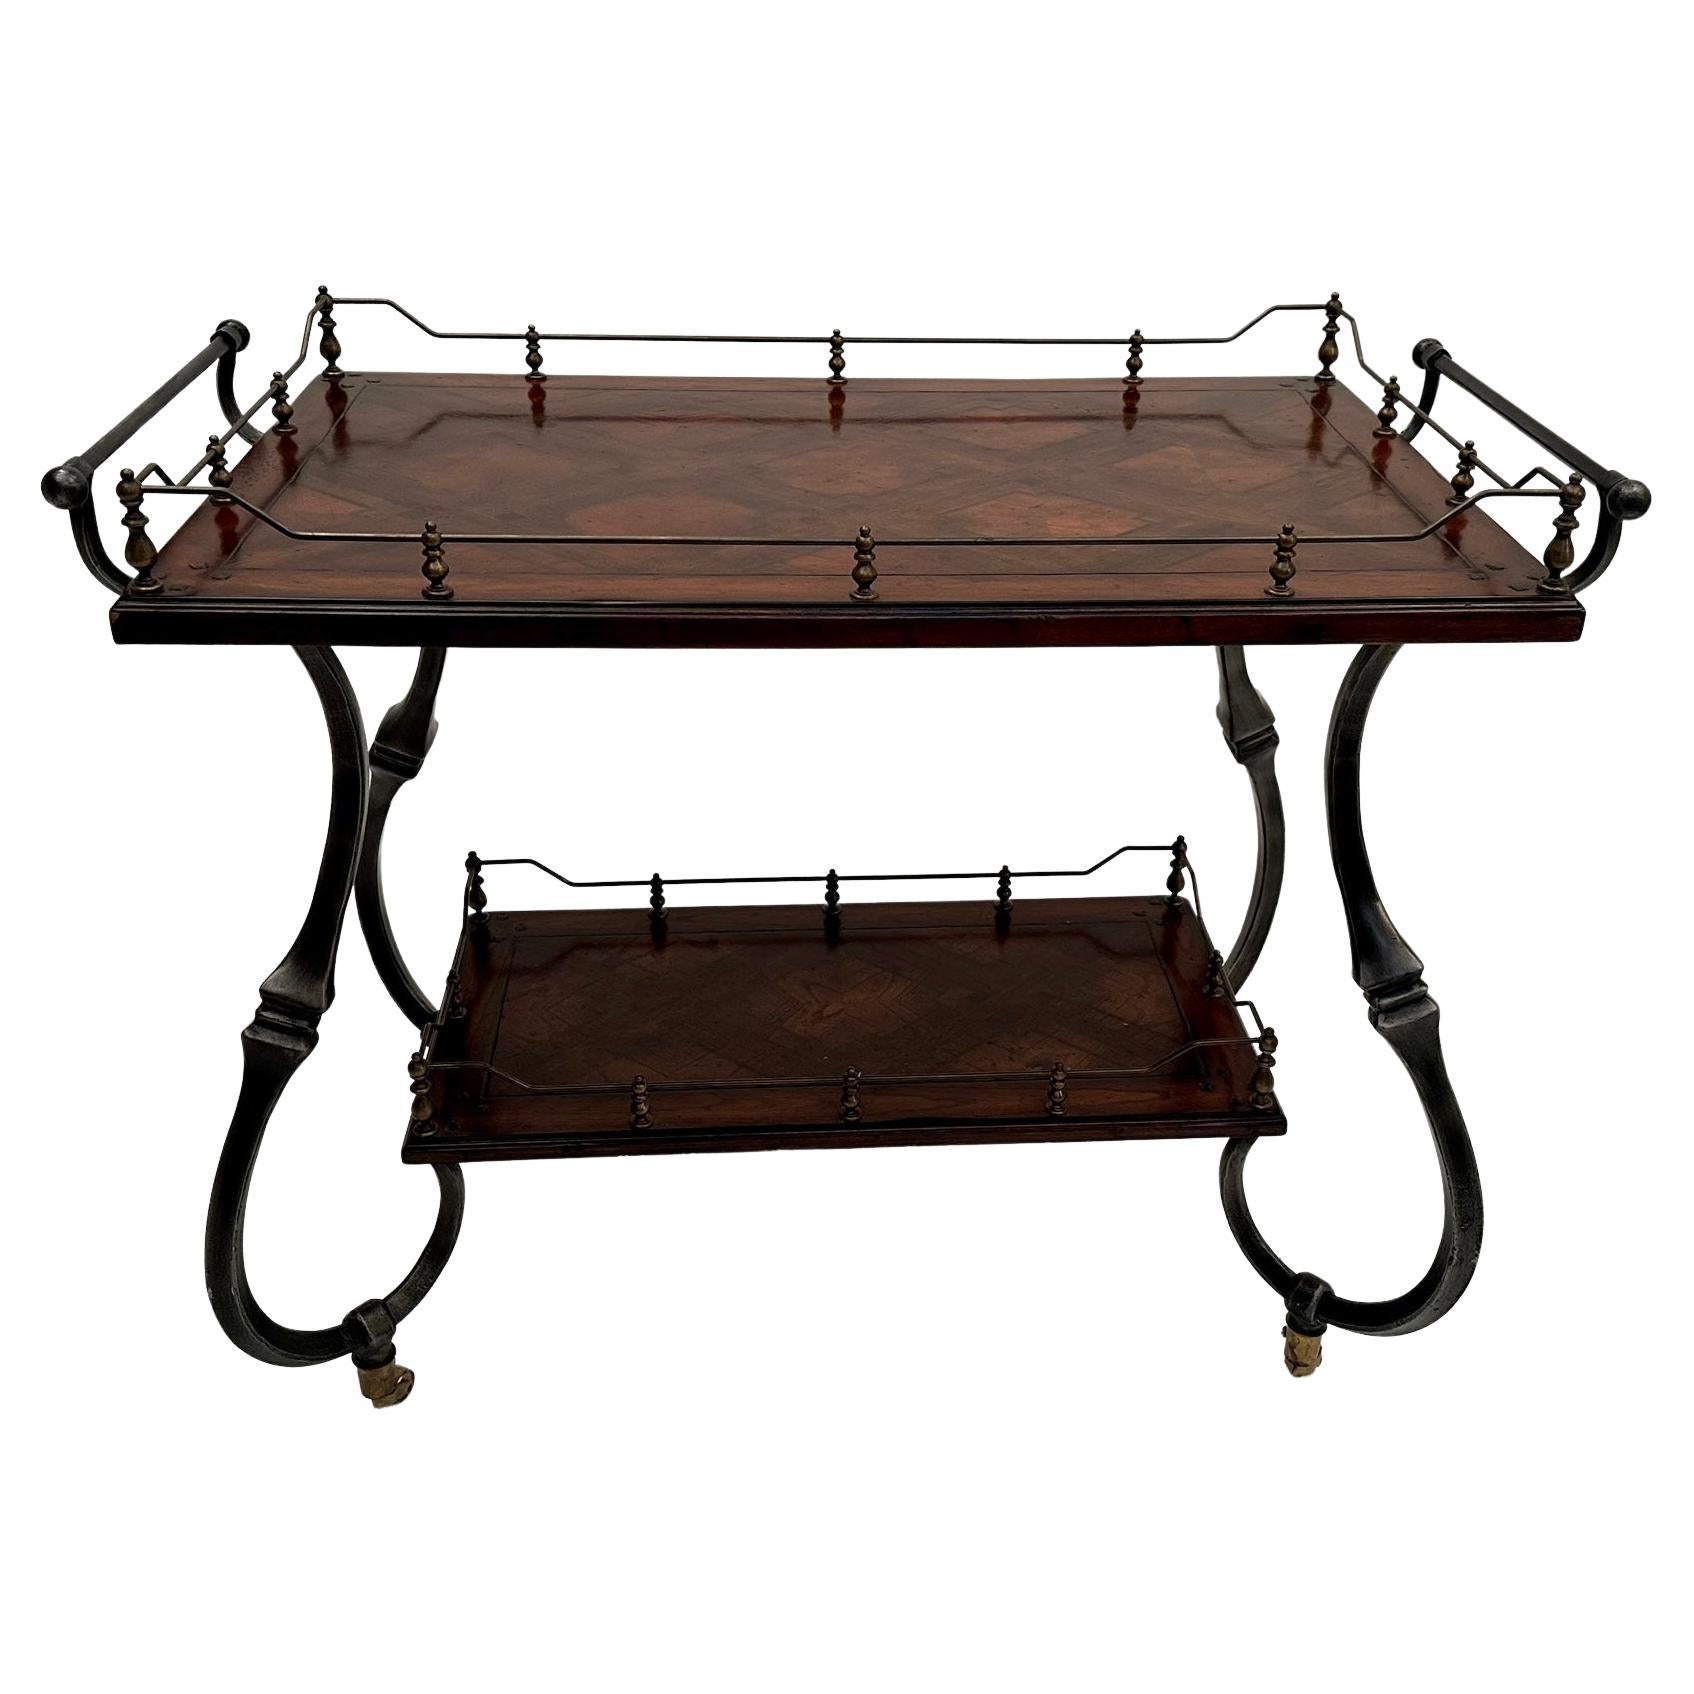 Mahogany and Wrought Iron Server Bar Cart with Parquetry Top